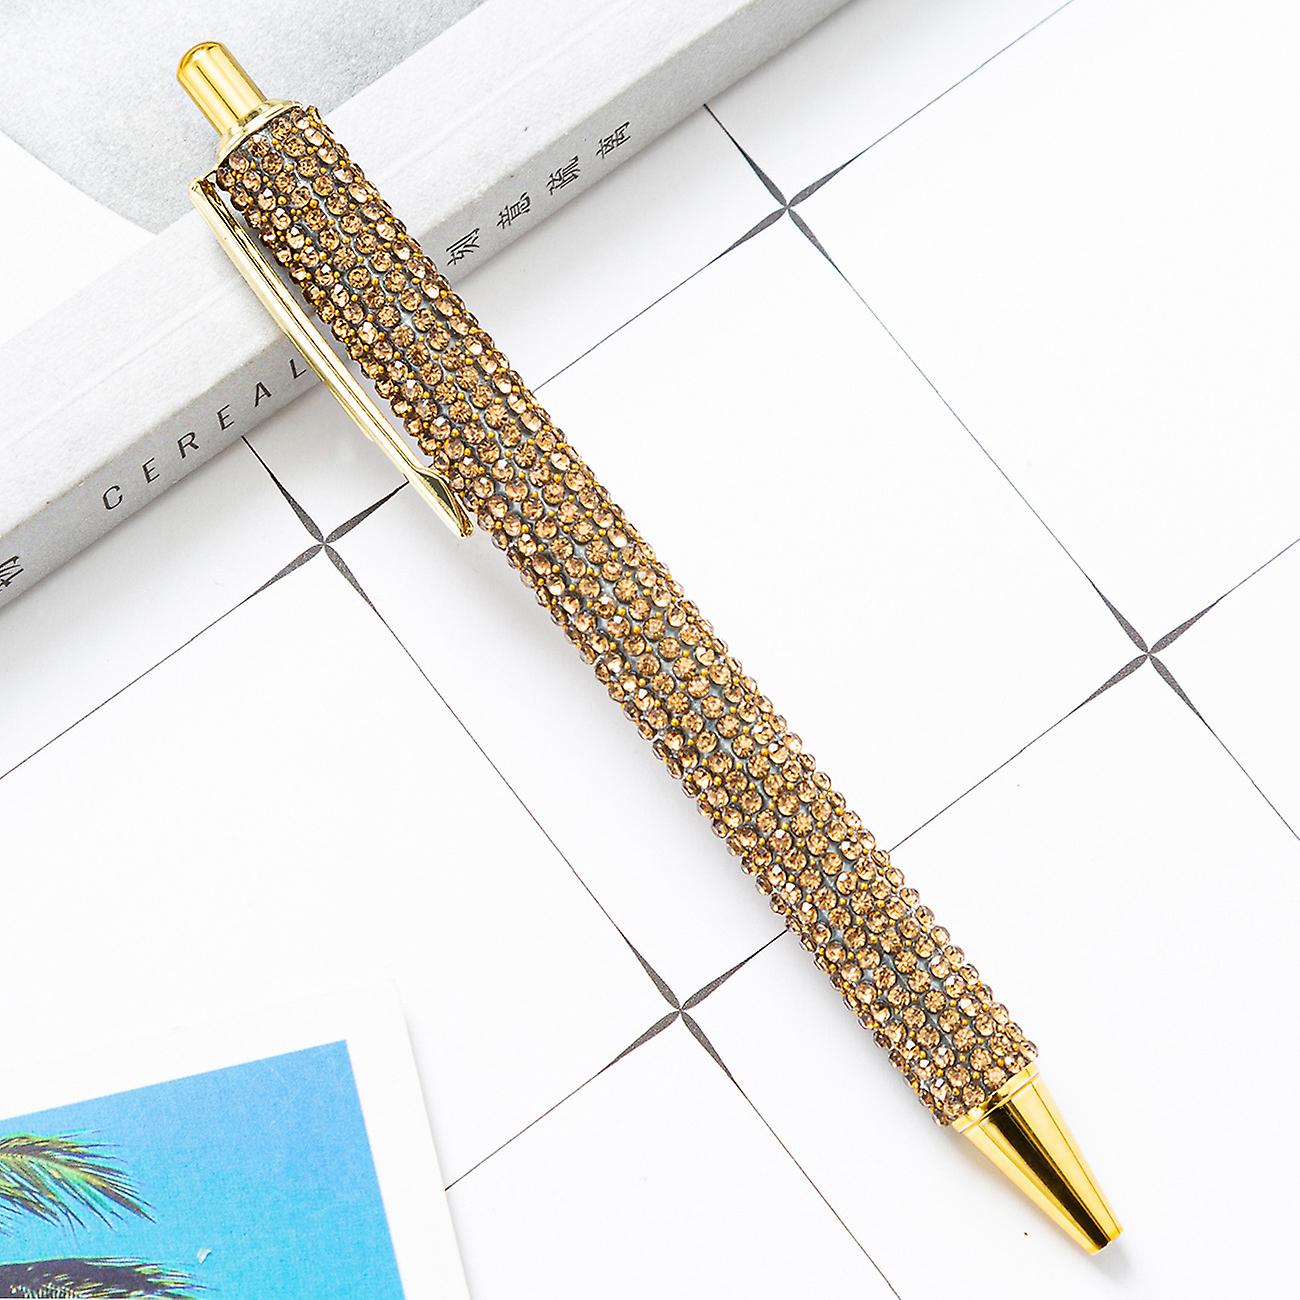 3pcs Pp Ballpoint Pen Glitter Sequin Writing Smoothly Crystal Press Type Pen For School Supplies Girls Boys Office Journaling Pens Draw， Gold